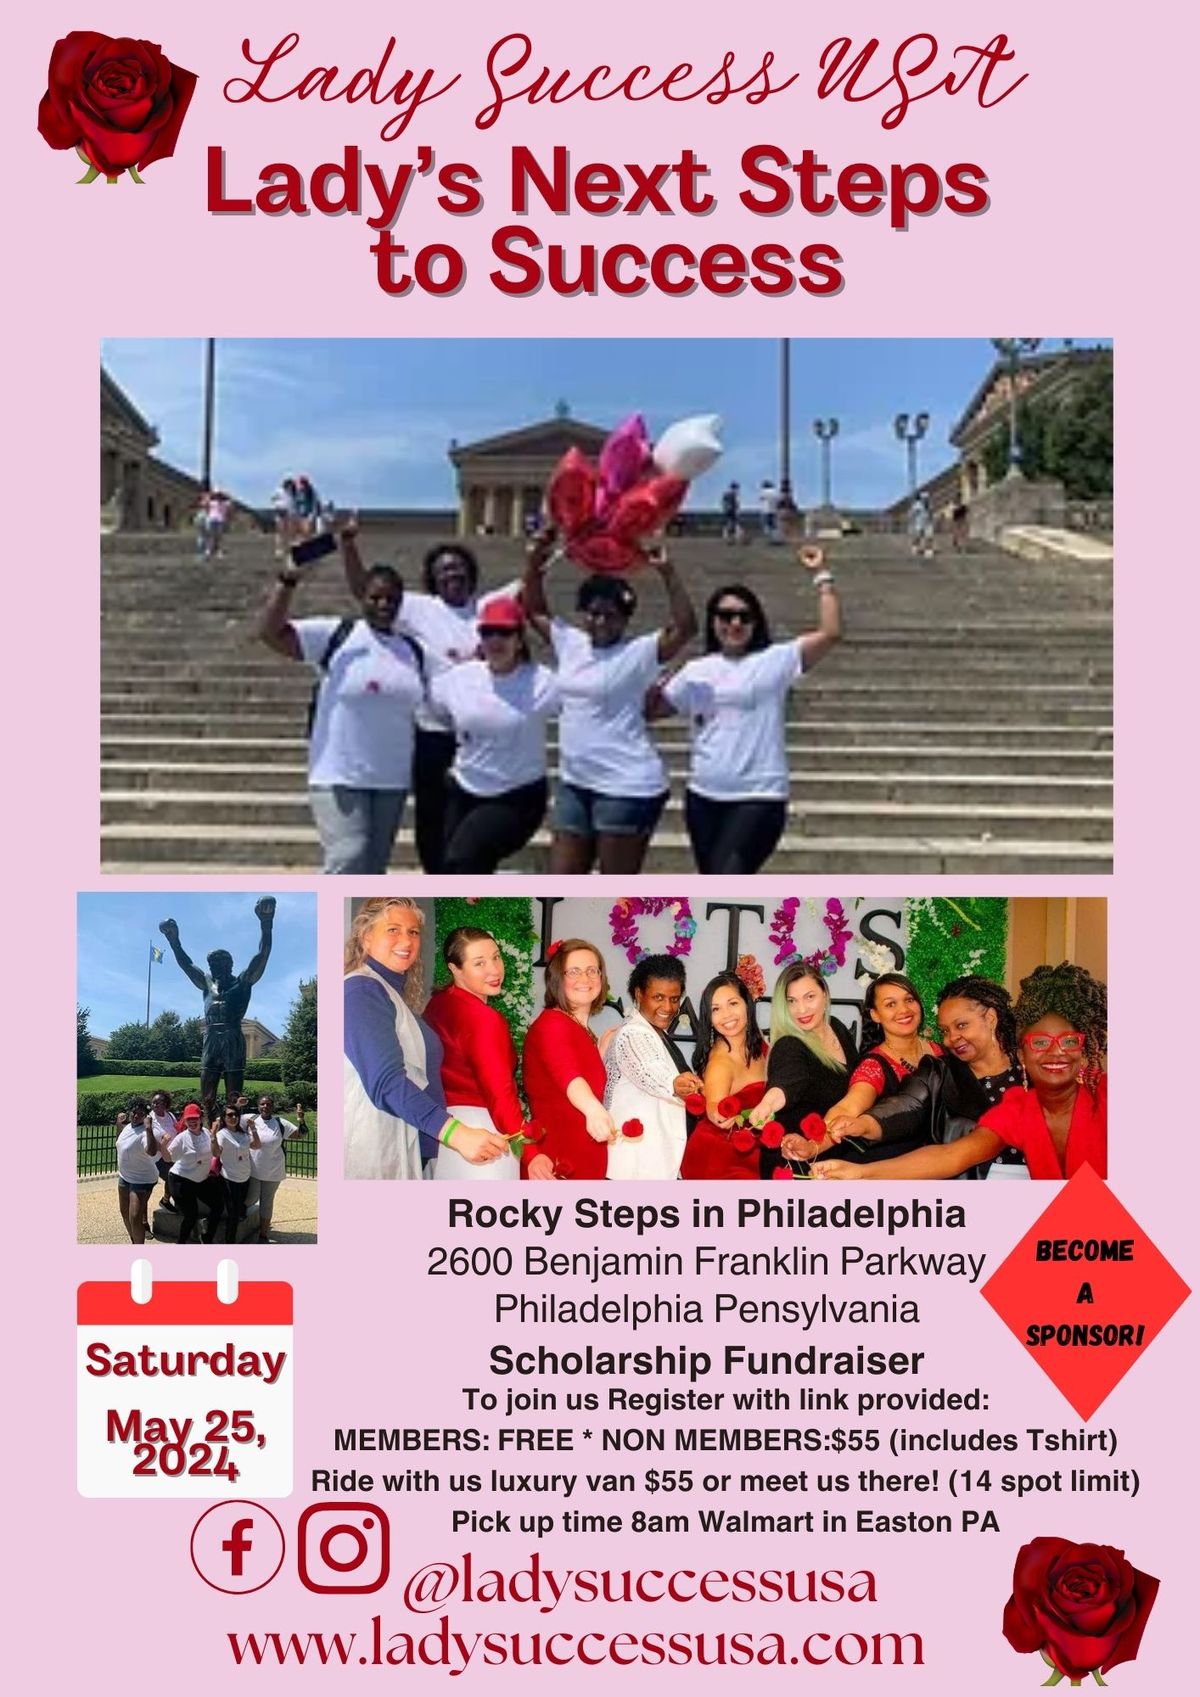 Next Steps to Success at the Rocky Steps MAY 25 SATURDAY